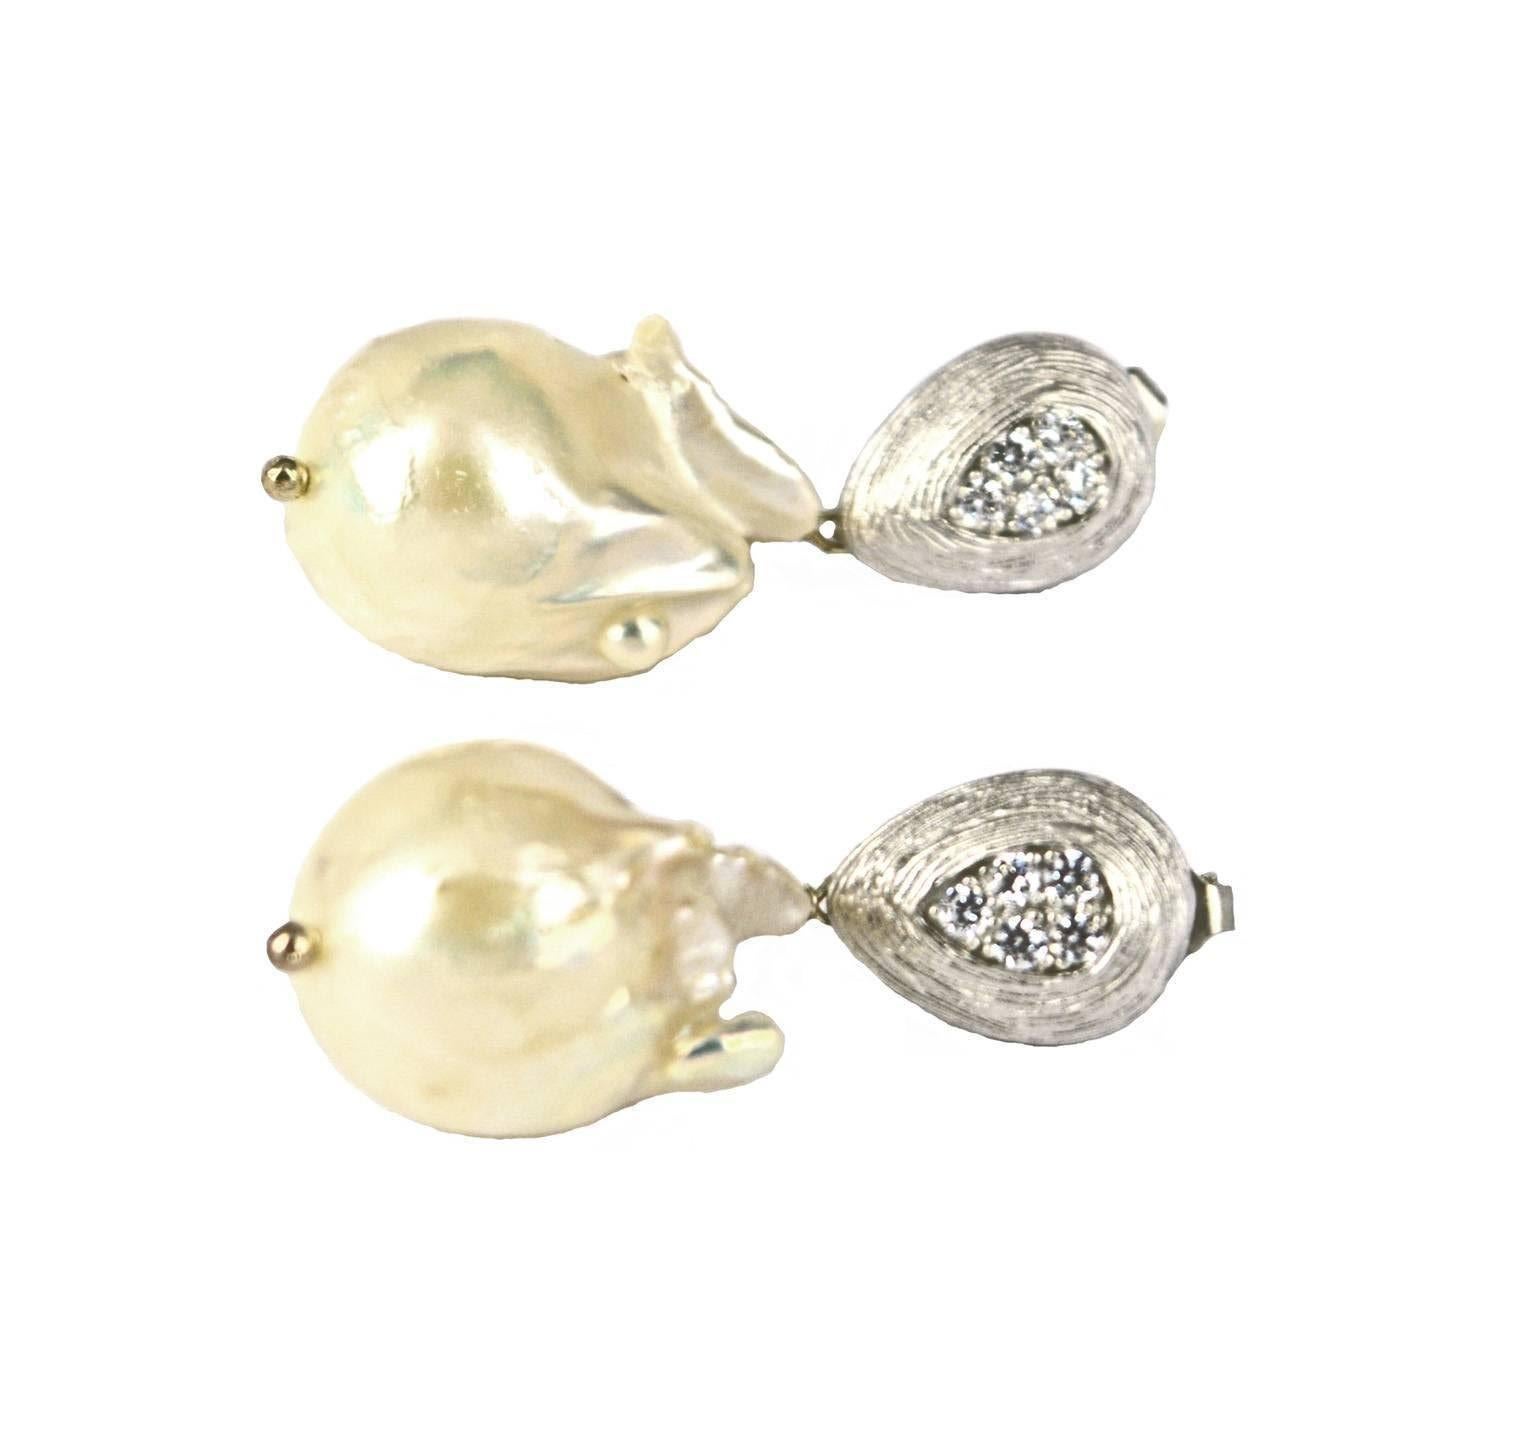 White Fresh Water Baroque Pearl with Rhodium plated CZ stud Sterling silver headpin.
38mm total length.
22mm x15mm pearl
Each earring weighs approx. 7 grams